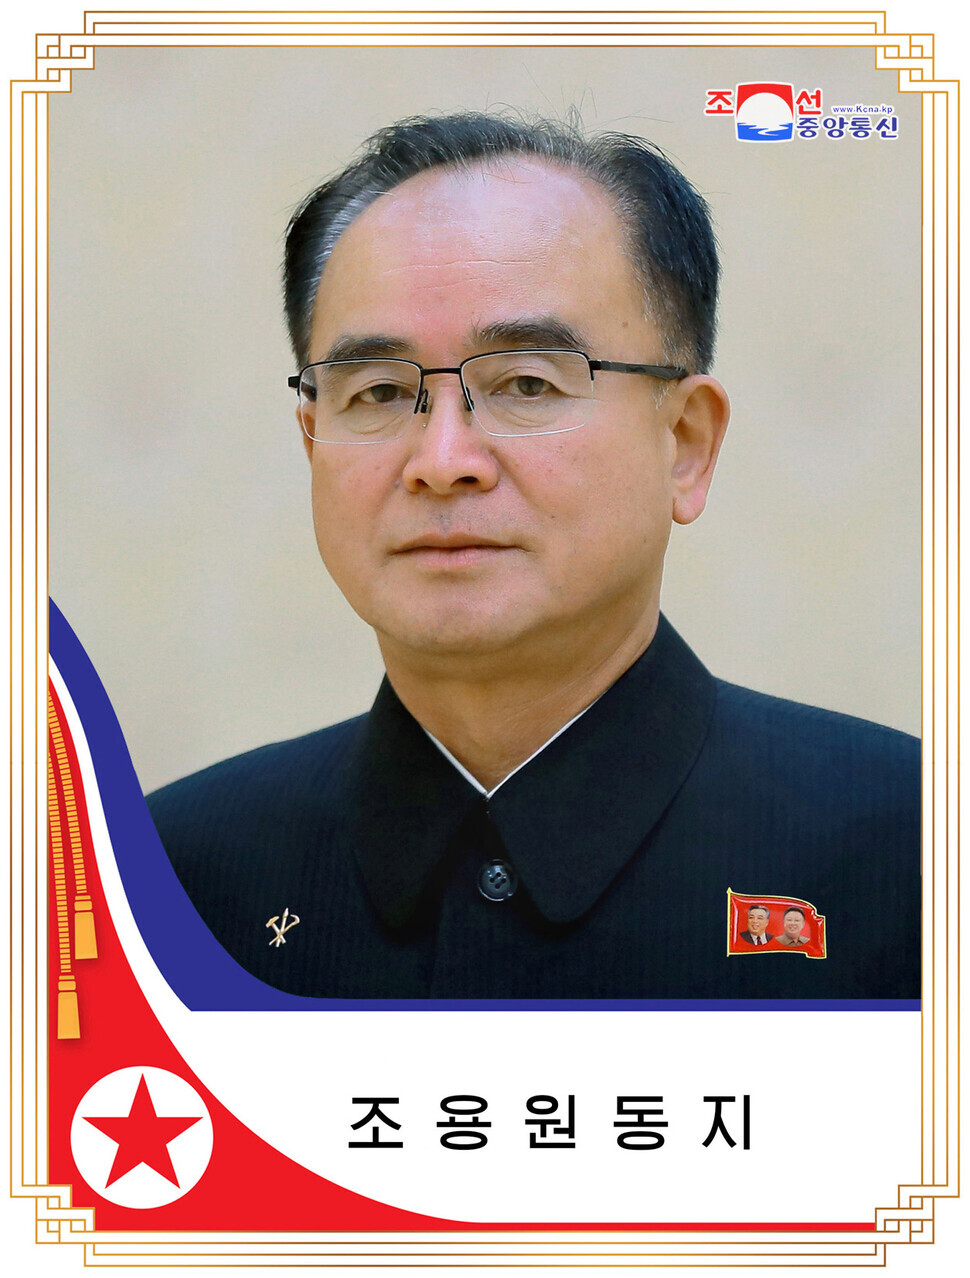 Jo Yong-won, a member of the presidium of the WPK Politburo and a newly elected member of the State Affairs Commission (KCNA/Yonhap News)